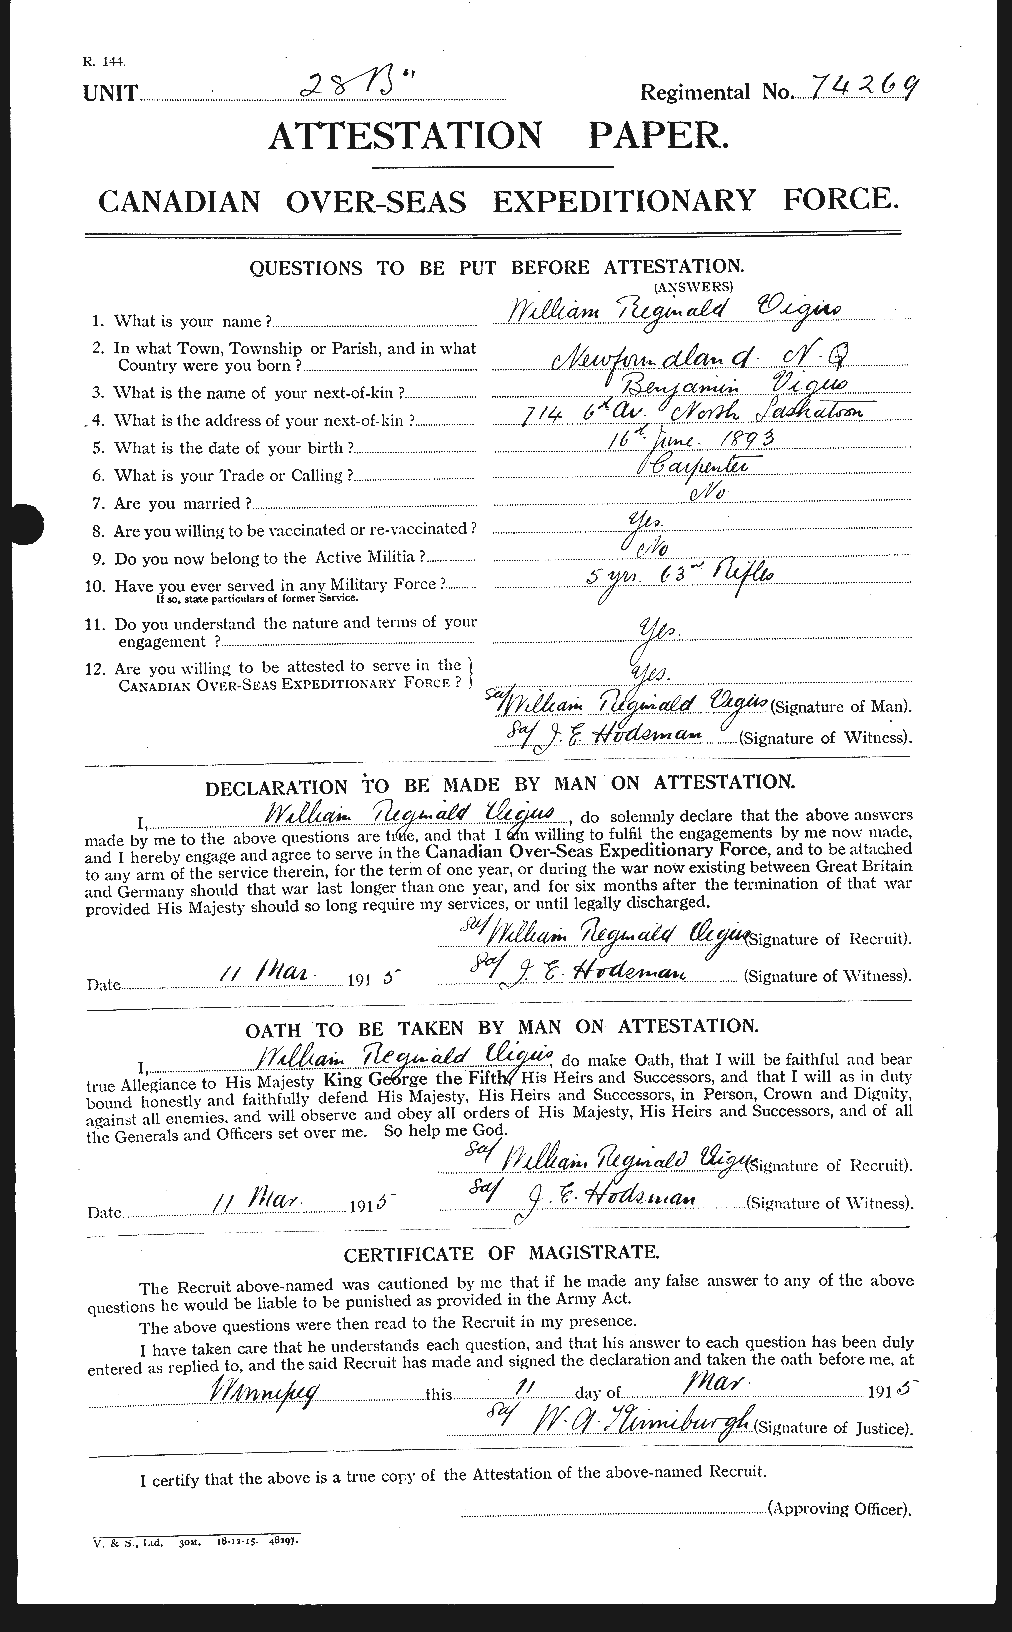 Personnel Records of the First World War - CEF 653732a